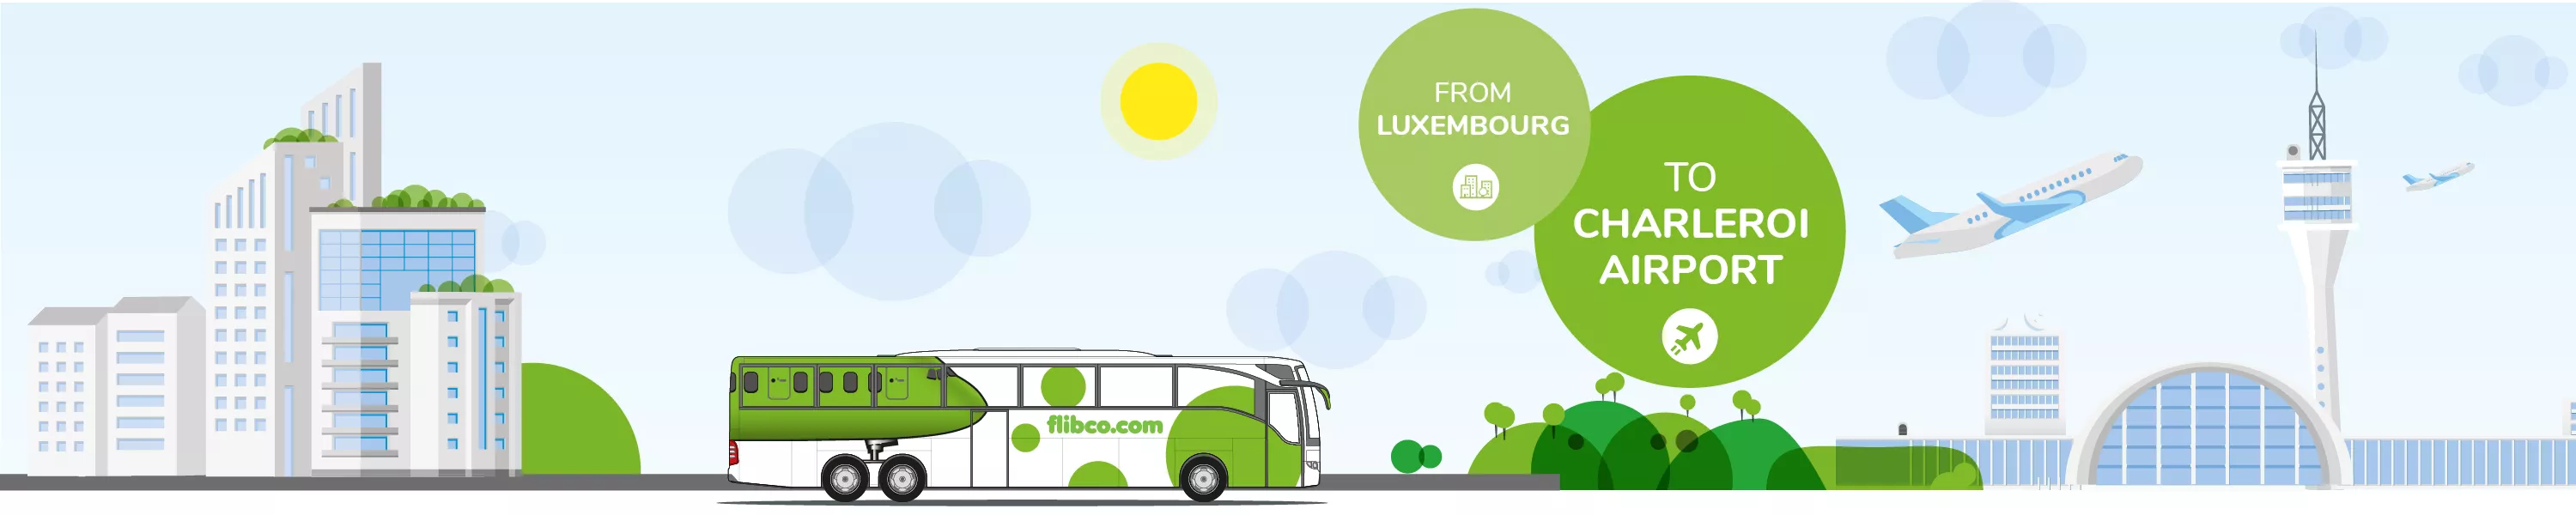 Luxembourg-Charleroi Airport line is back! I Book on flibco.com 🚌